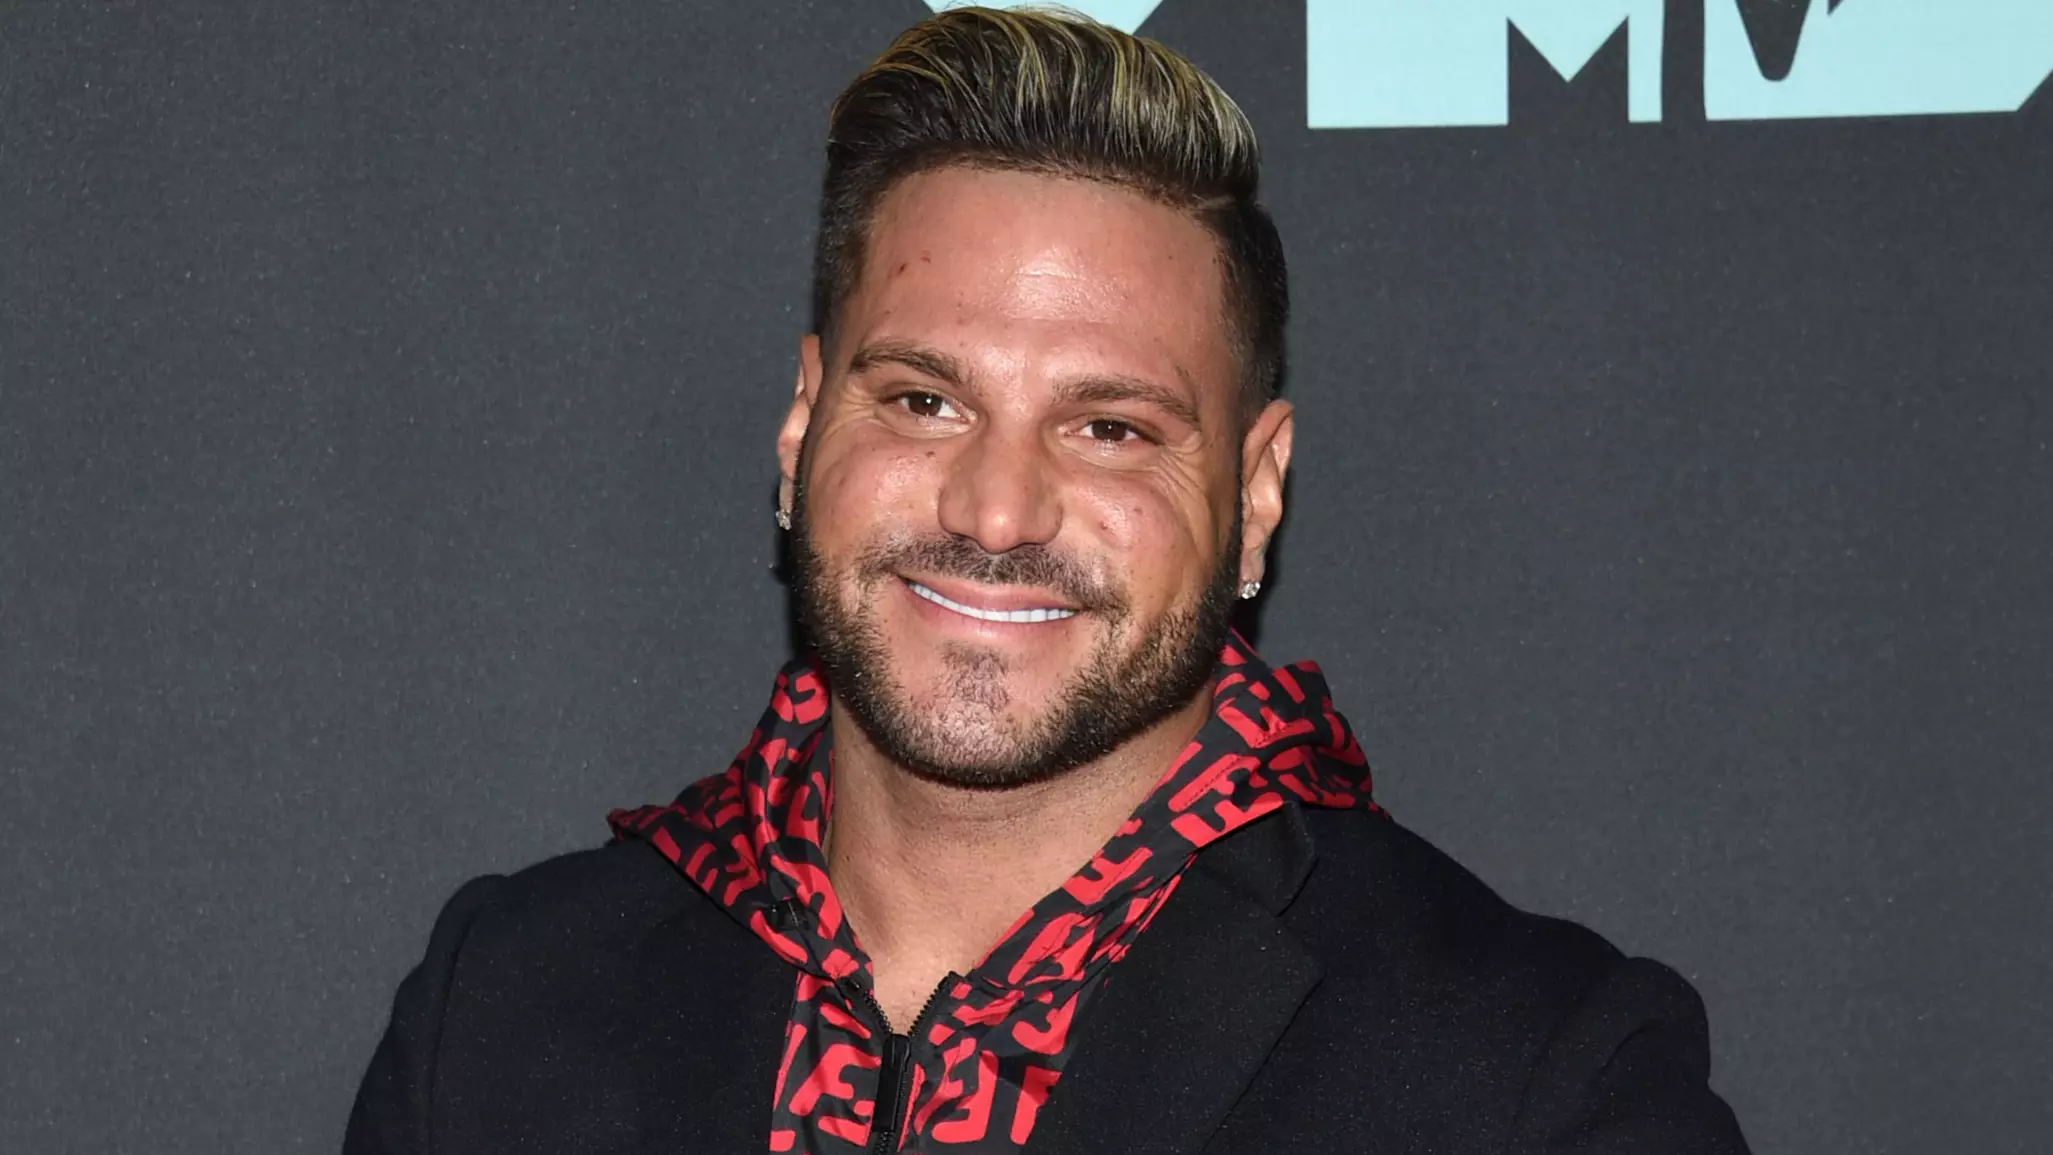 Jersey Shore's Ronnie Ortiz-Magro Has Been Arrested For Domestic Violence